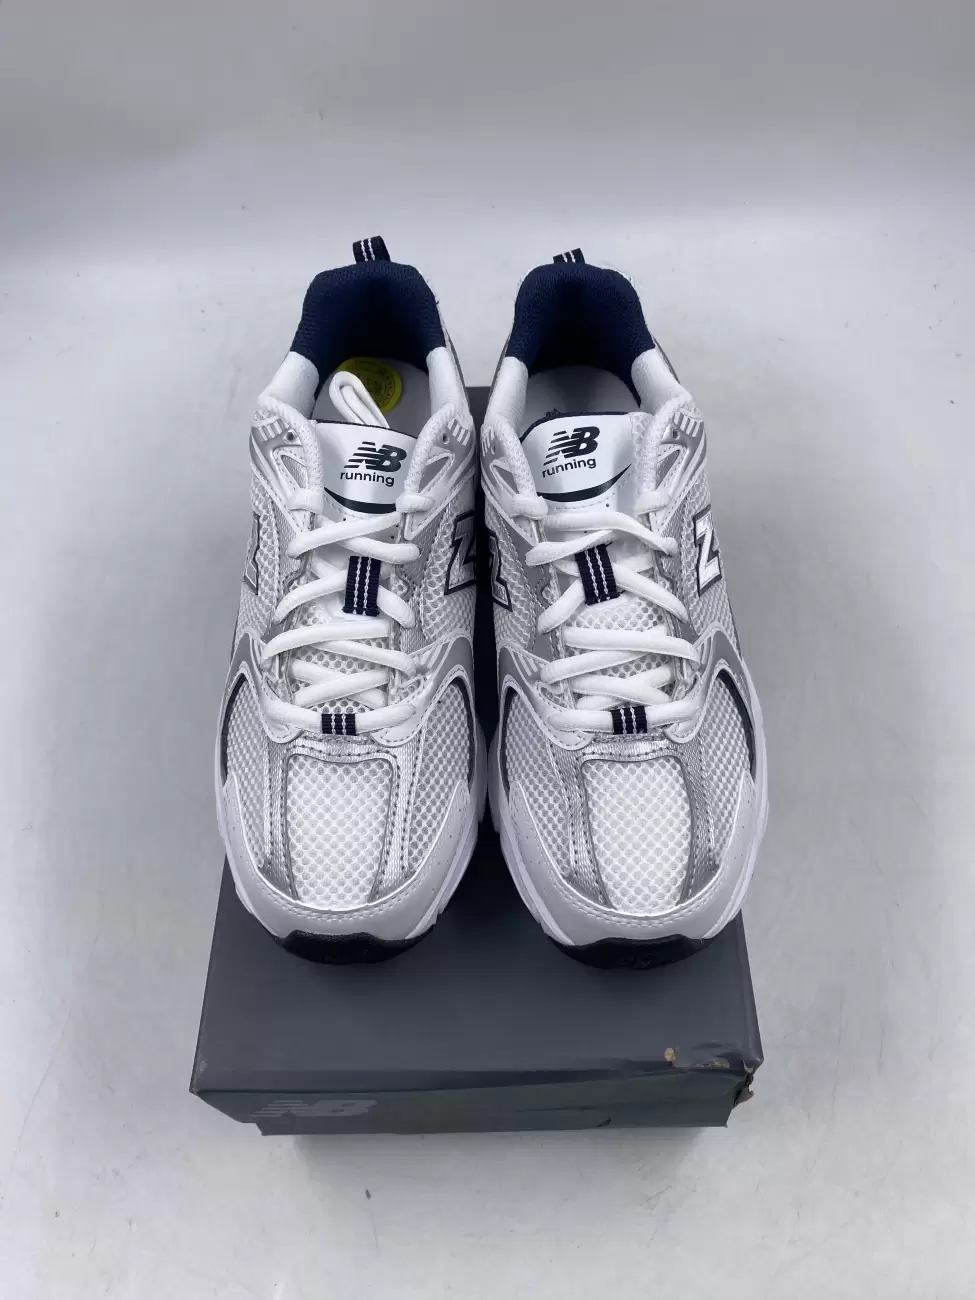 New Balance 530 White Silver Navy Discount 20% ⚡️ All sizes available ✓  Authentic with box 📦 order now by DMs 📥